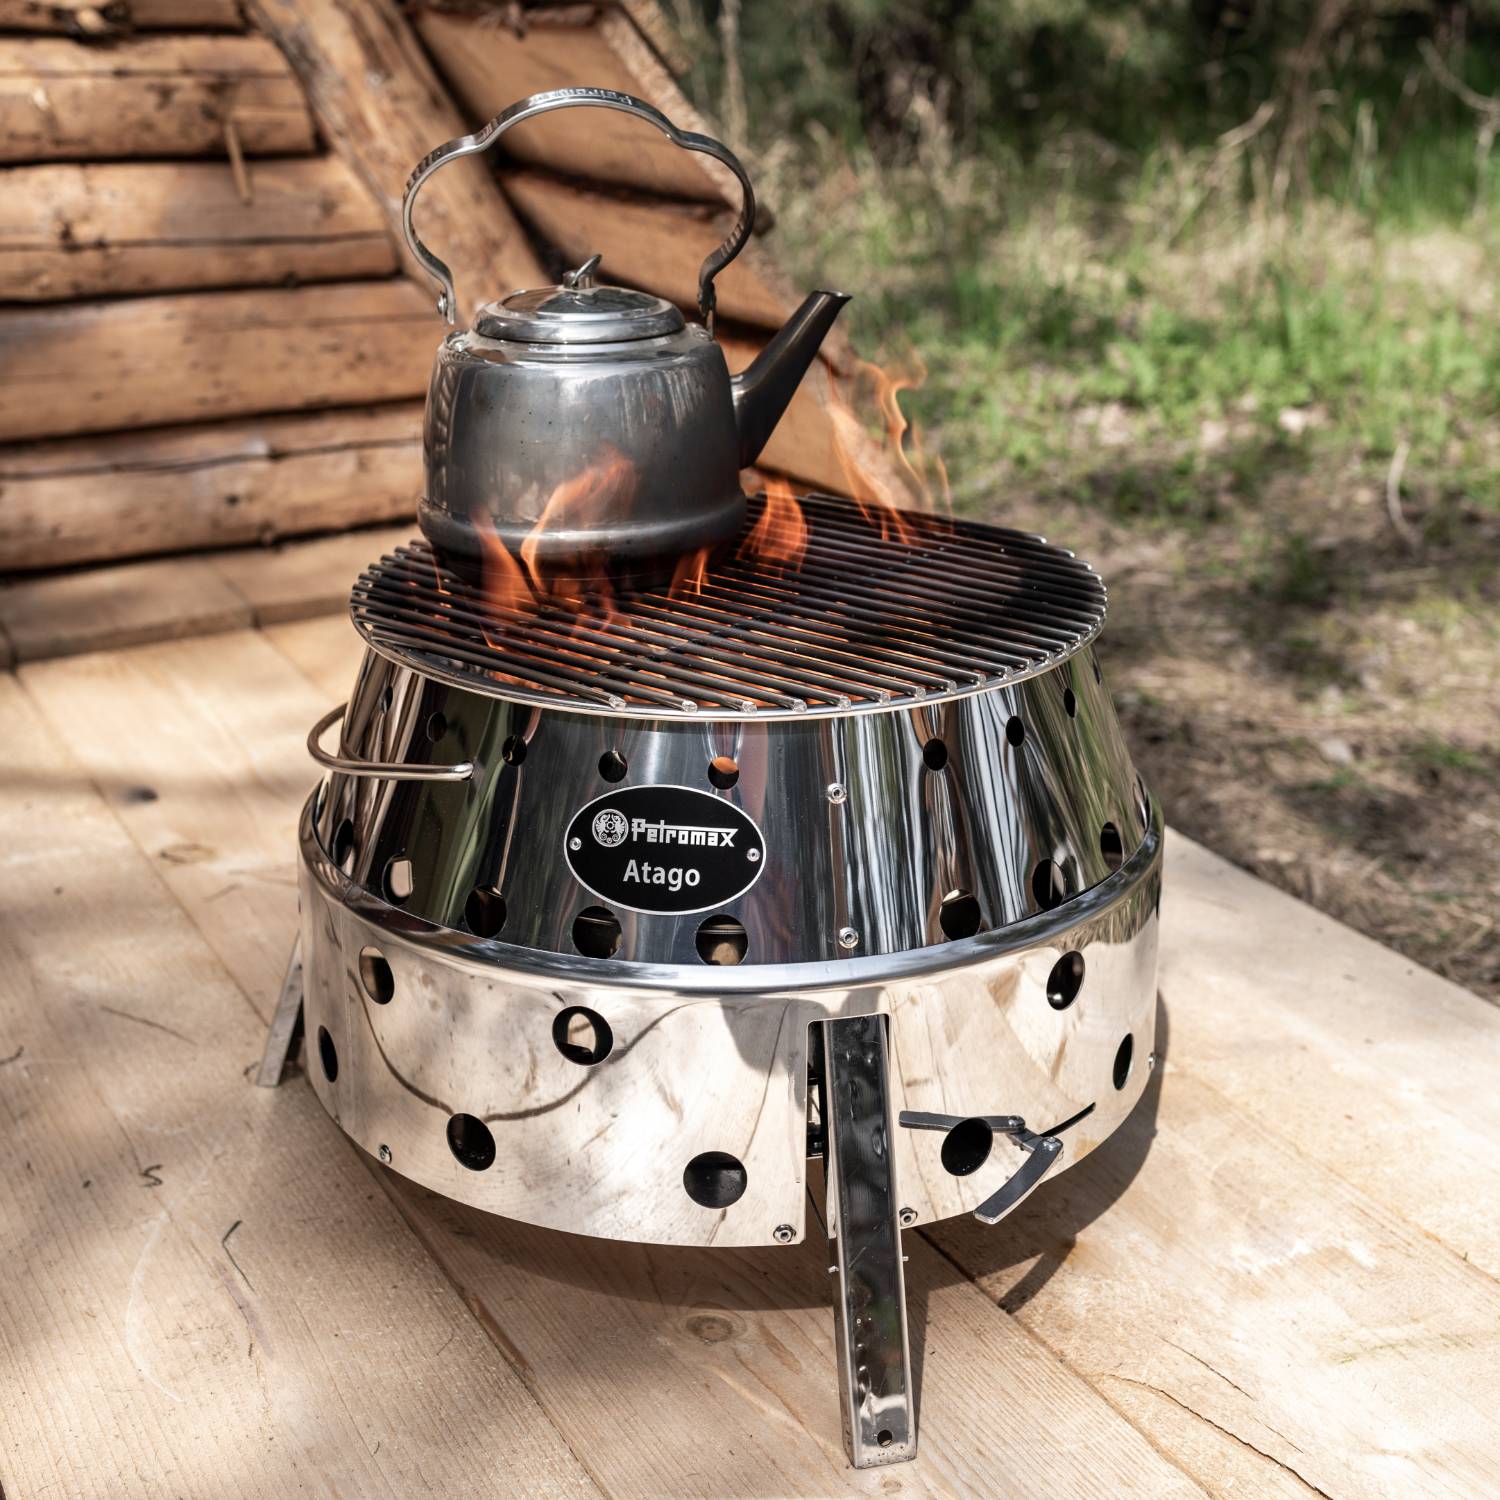 Petromax Stainless Steel Teakettle for Indoor/Outdoor Use Over an Open  Campfire or in your Kitchen, Holds Up to 3.2 Qt